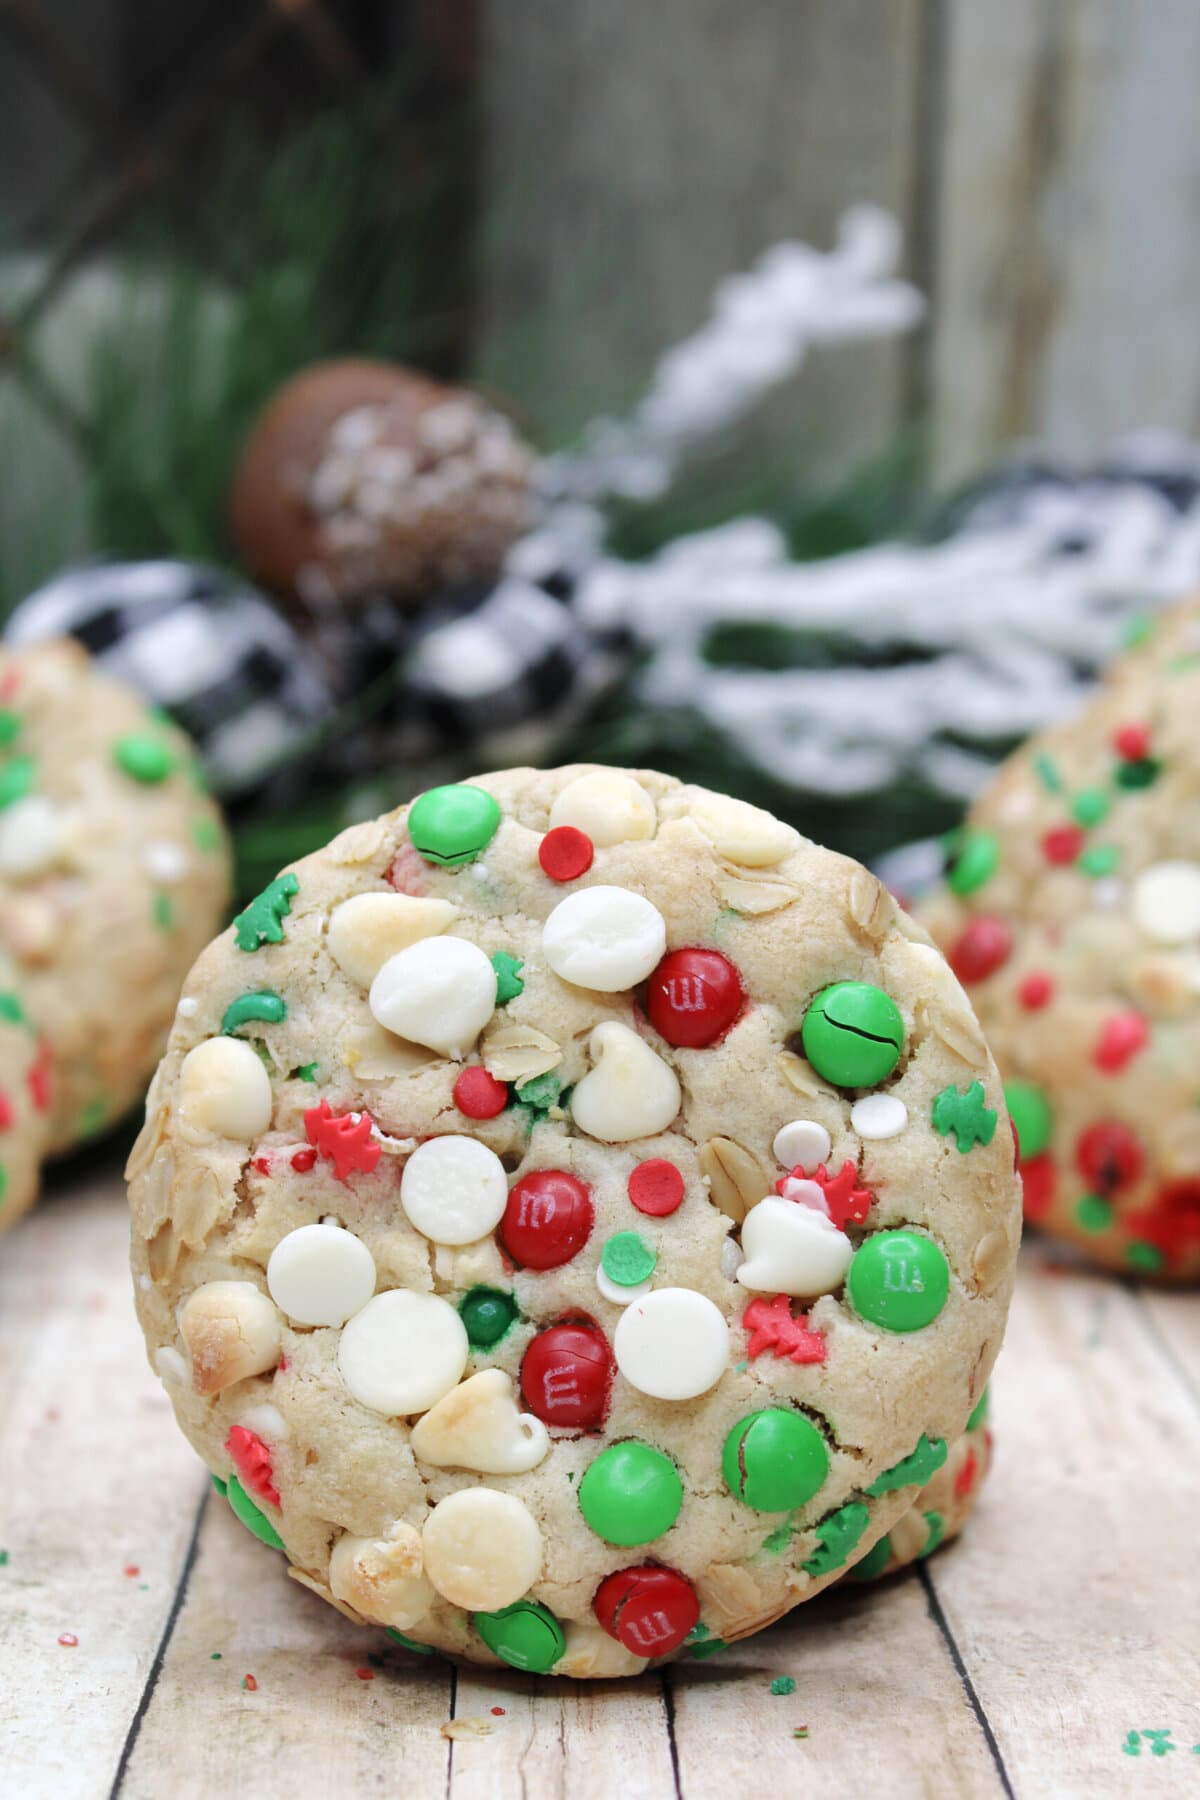 One of the Christmas Oatmeal Cookies.